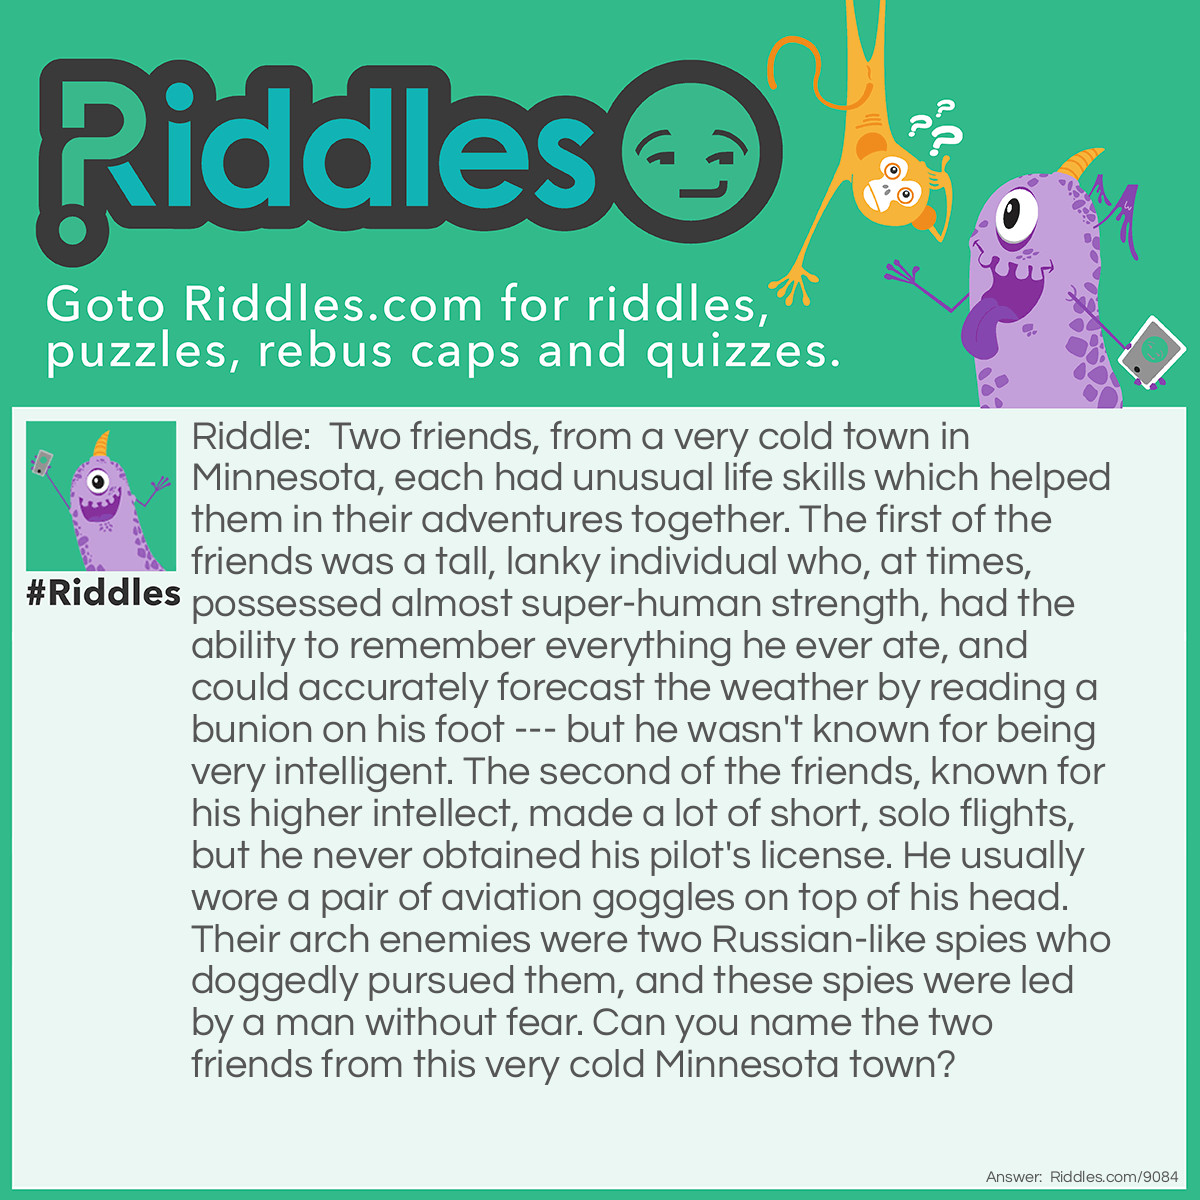 Riddle: Two friends, from a very cold town in Minnesota, each had unusual life skills which helped them in their adventures together. The first of the friends was a tall, lanky individual who, at times, possessed almost super-human strength, had the ability to remember everything he ever ate, and could accurately forecast the weather by reading a bunion on his foot --- but he wasn't known for being very intelligent. The second of the friends, known for his higher intellect, made a lot of short, solo flights, but he never obtained his pilot's license. He usually wore a pair of aviation goggles on top of his head. Their arch enemies were two Russian-like spies who doggedly pursued them, and these spies were led by a man without fear. Can you name the two friends from this very cold Minnesota town? Answer: Rocket J. Squirrel and Bullwinkle J. Moose, otherwise known as Rocky and Bullwinkle. The two Russian-like spies (Boris and Natasha) were lead by the infamous Fearless Leader.